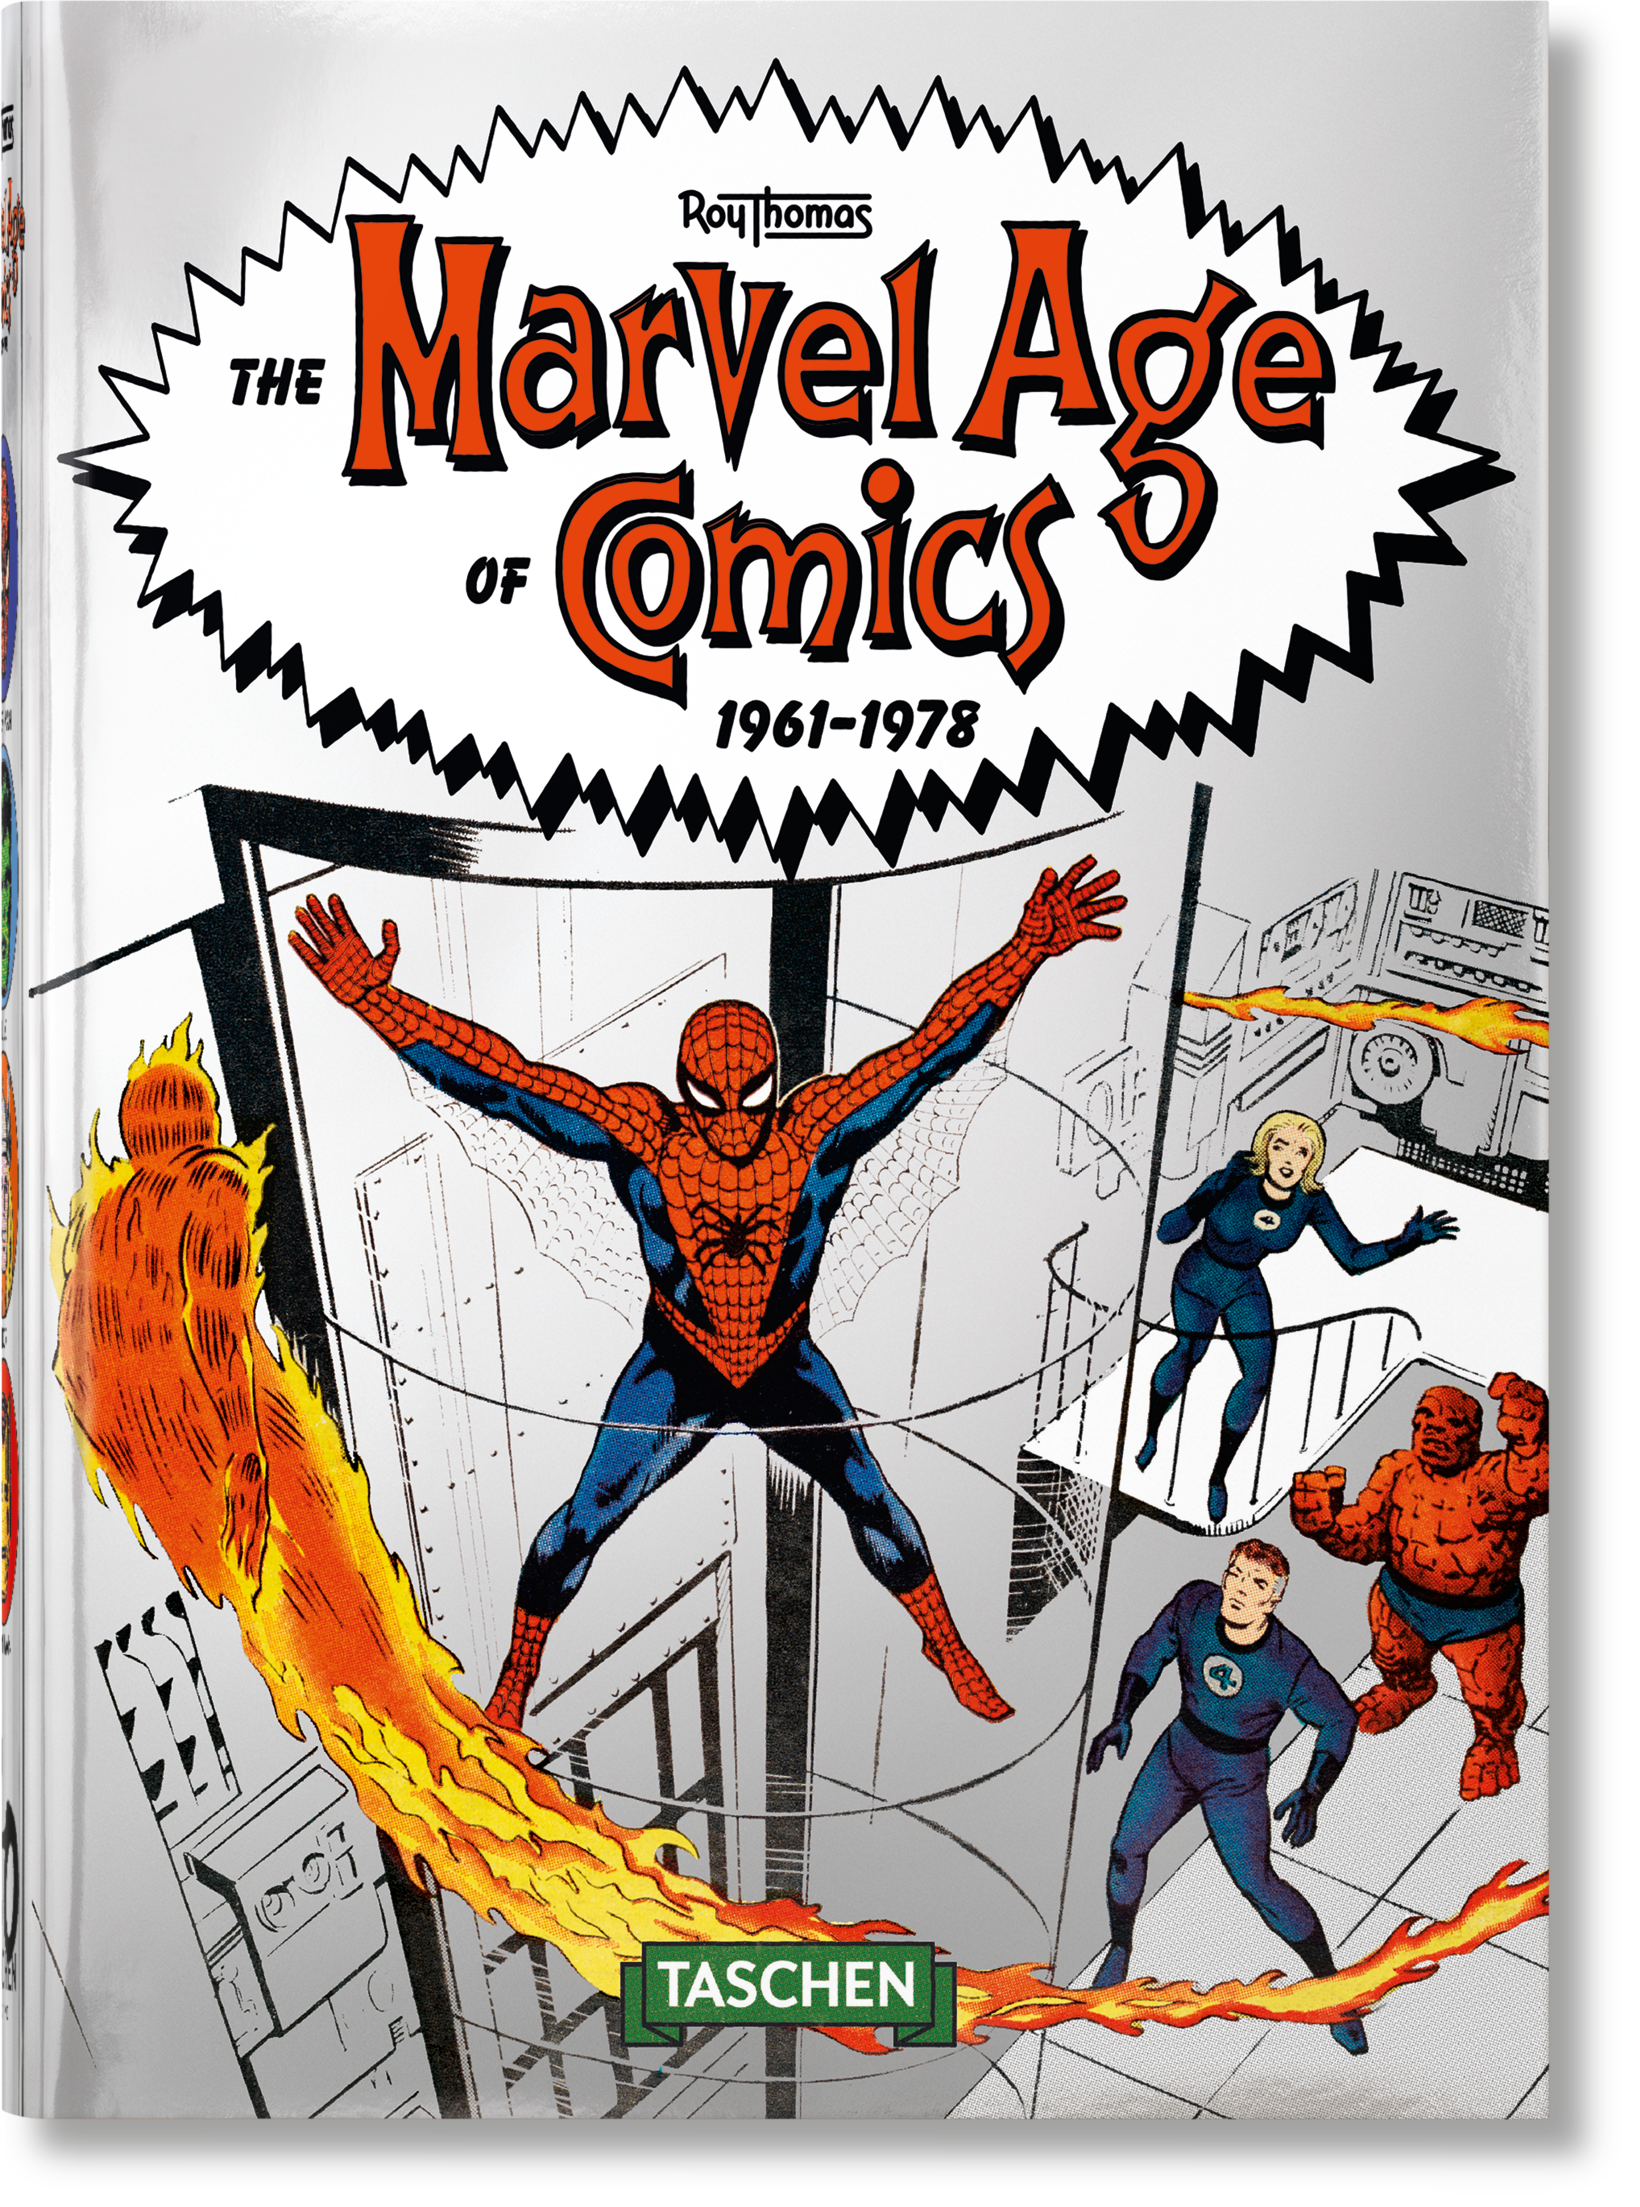 The Marvel Age of Comics 1961-1978 (cover)